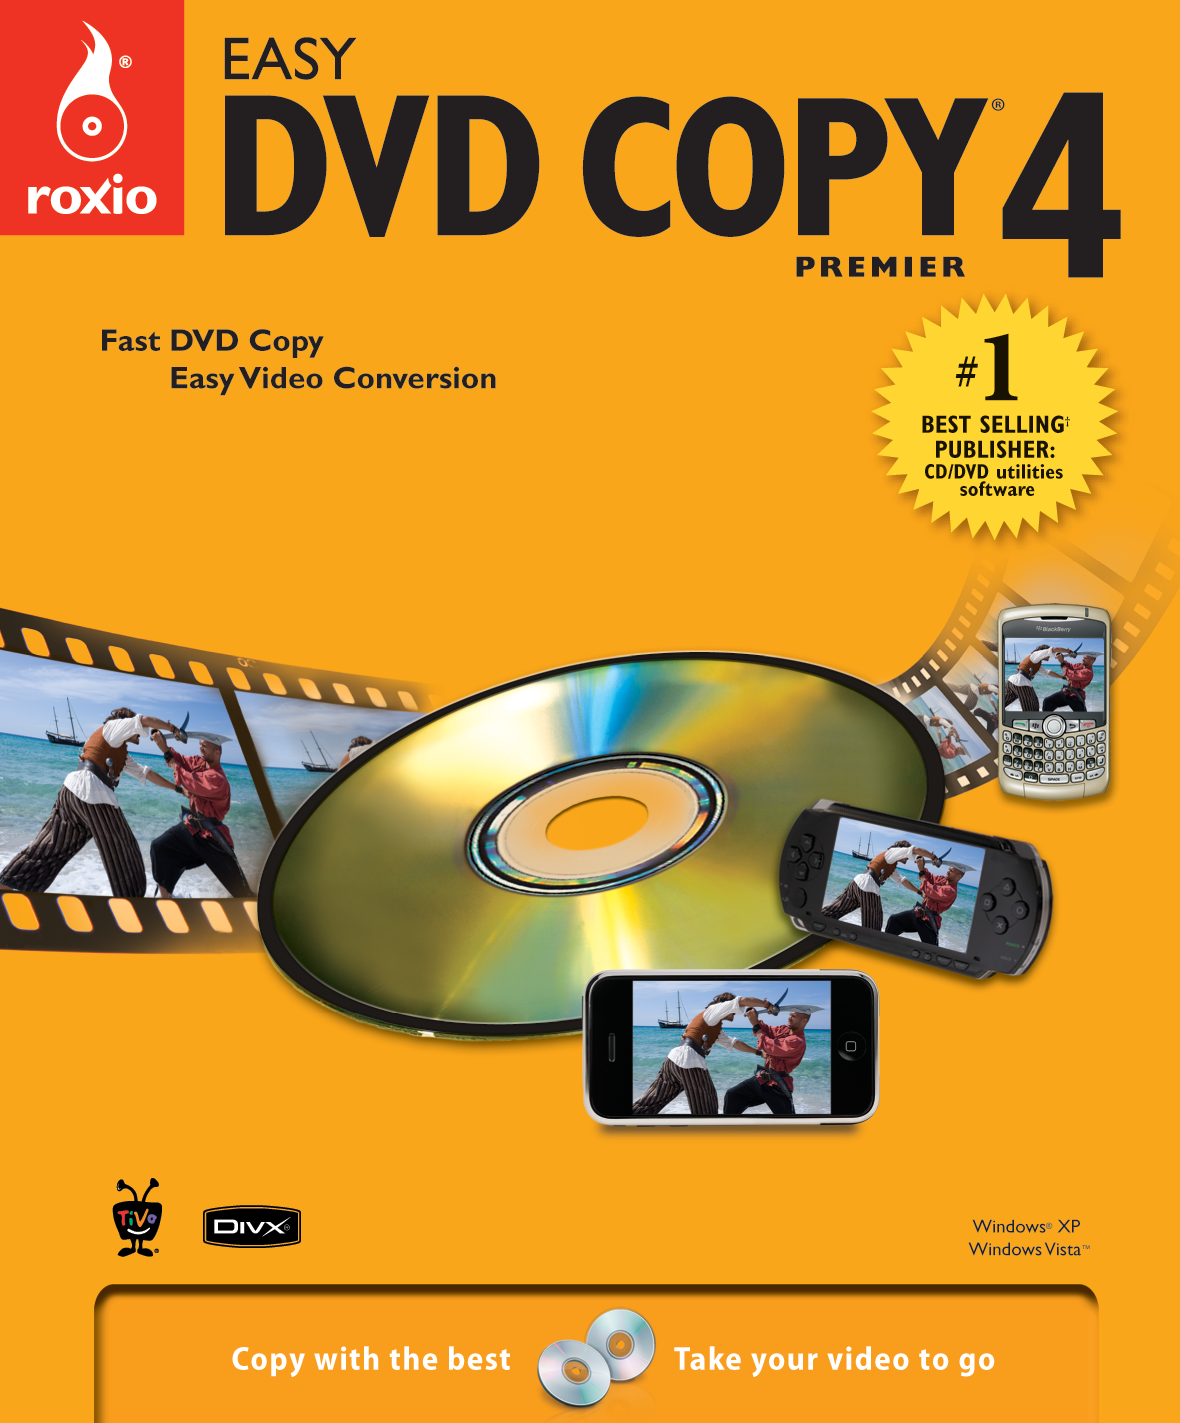 copy copyrighted vhs to dvd free